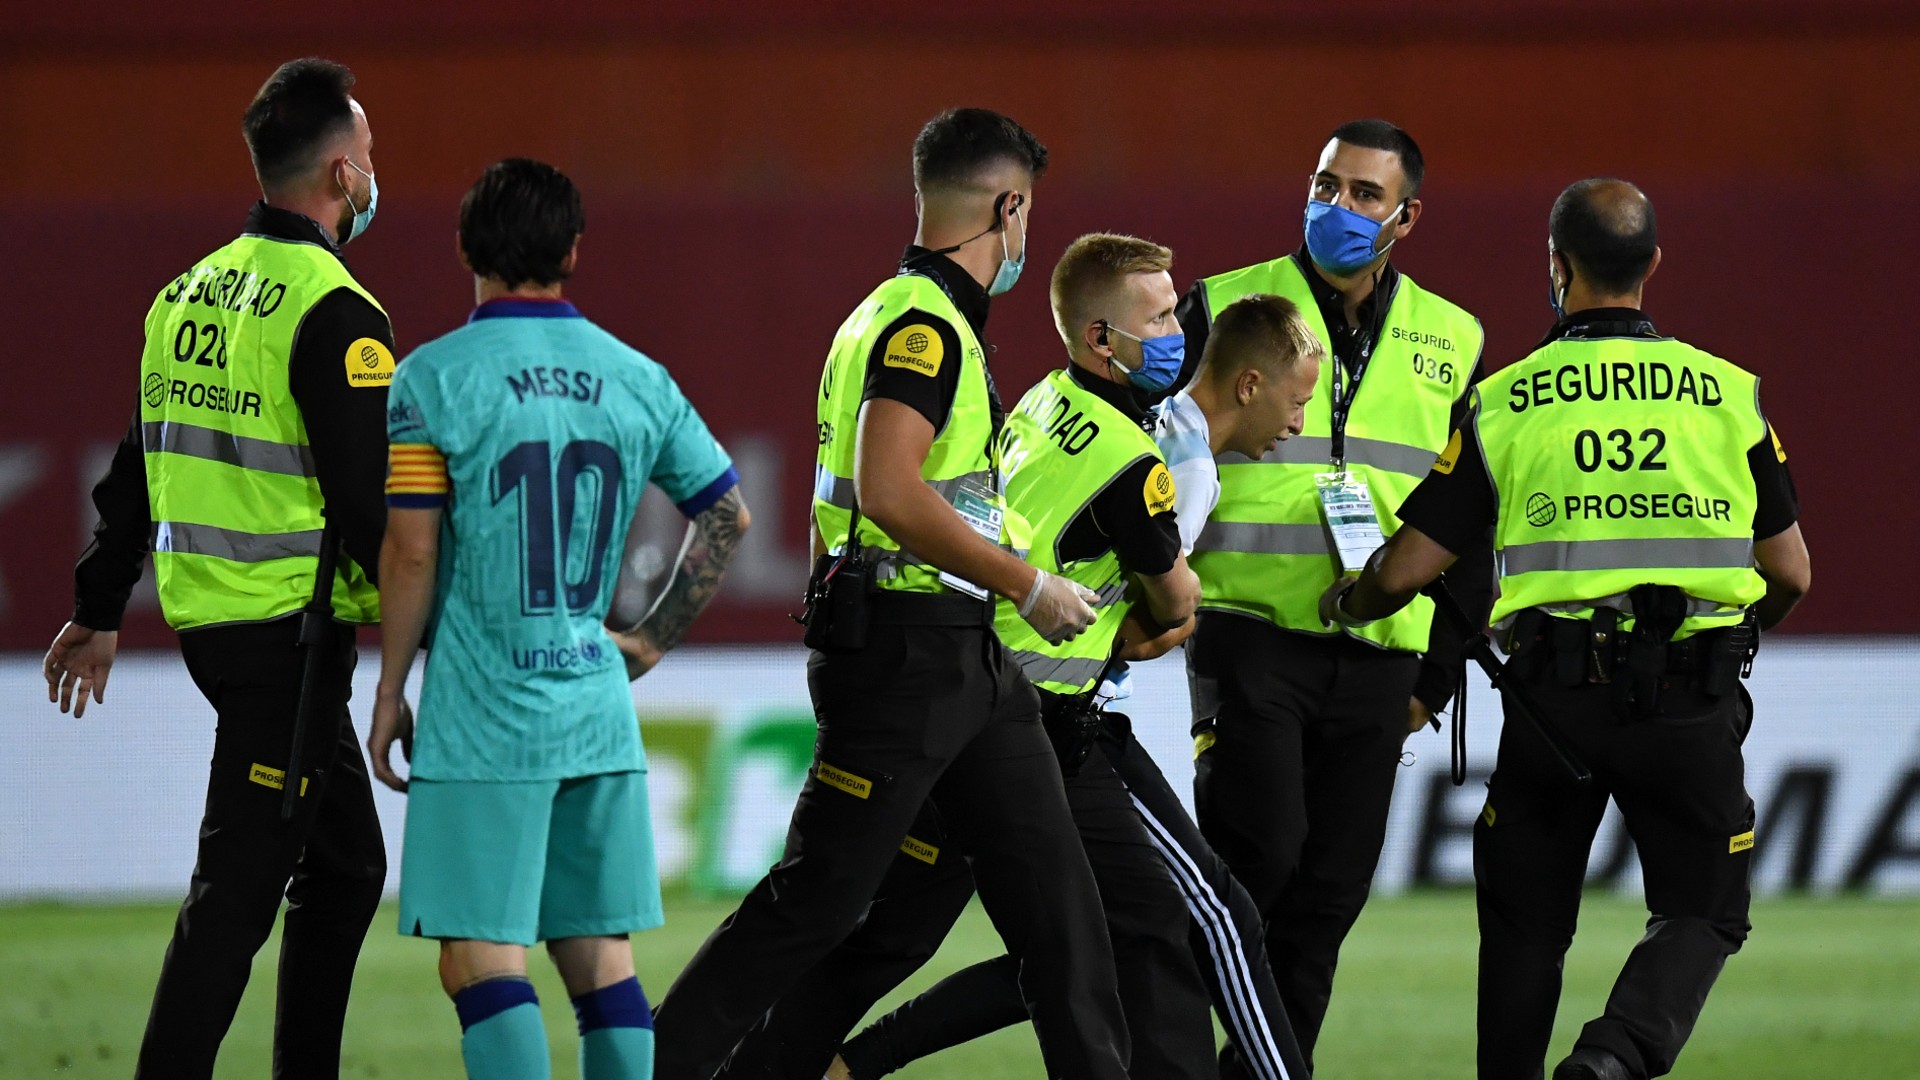 Messi-chasing pitch invader faces stiff punishment after breaking coronavirus protocol